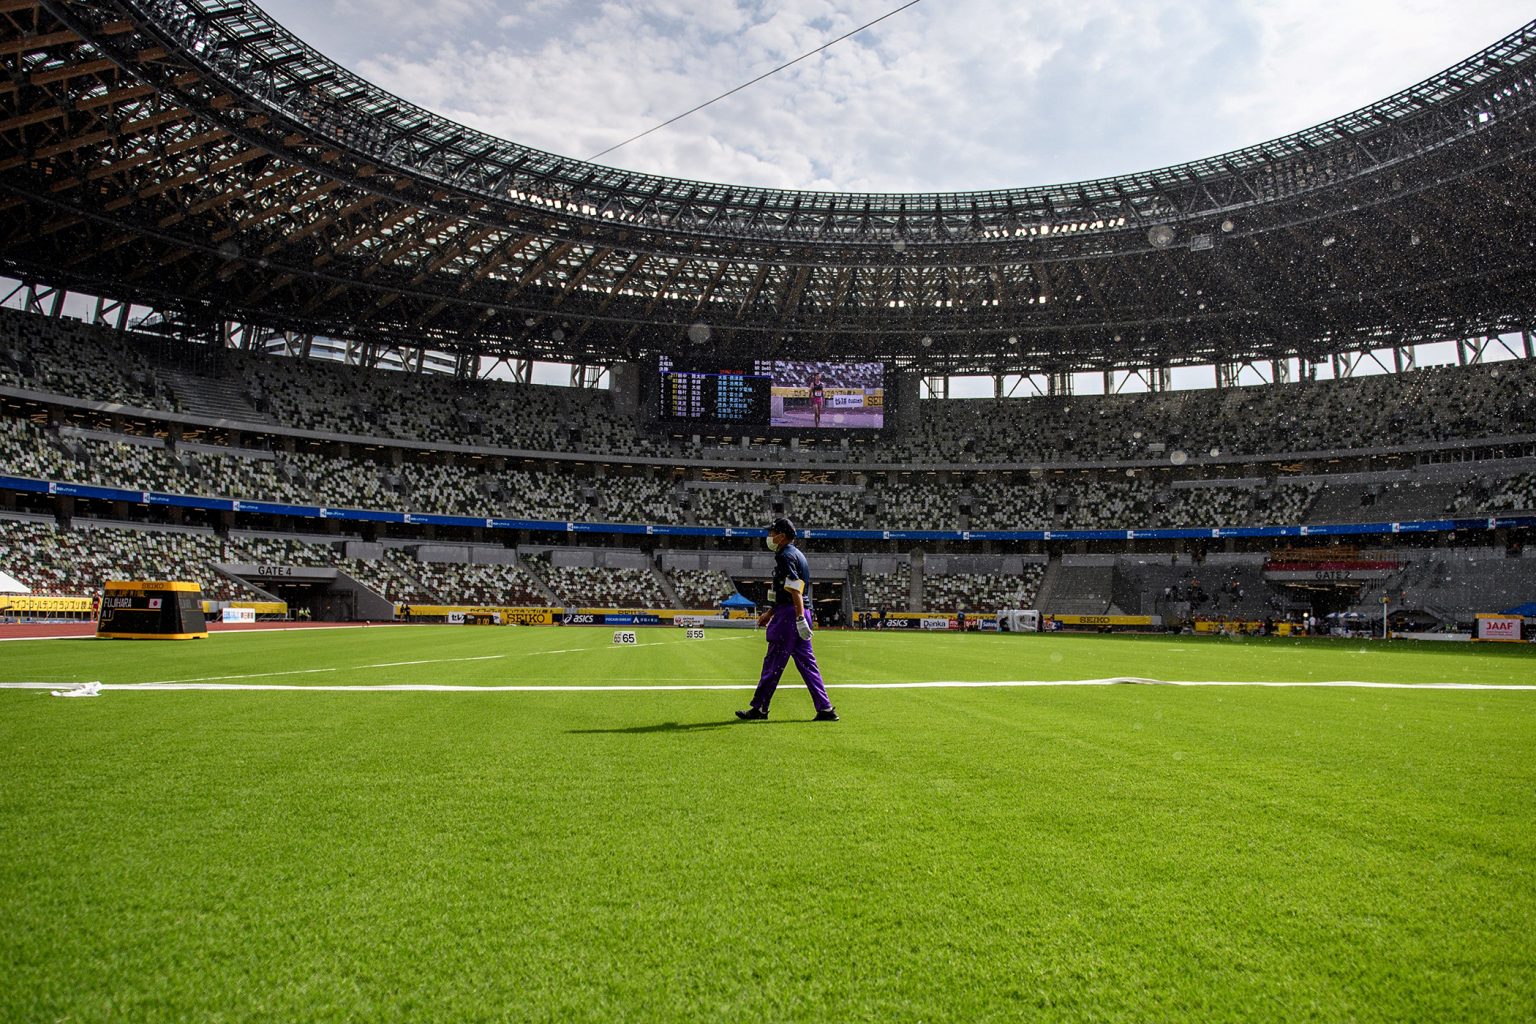 An official walks across the infield of the National Stadium in Tokyo, home of the 2020 Olympic Games. A UGA-bred grass will be used on the field. (Photo by PHILIP FONG/AFP via Getty Images)